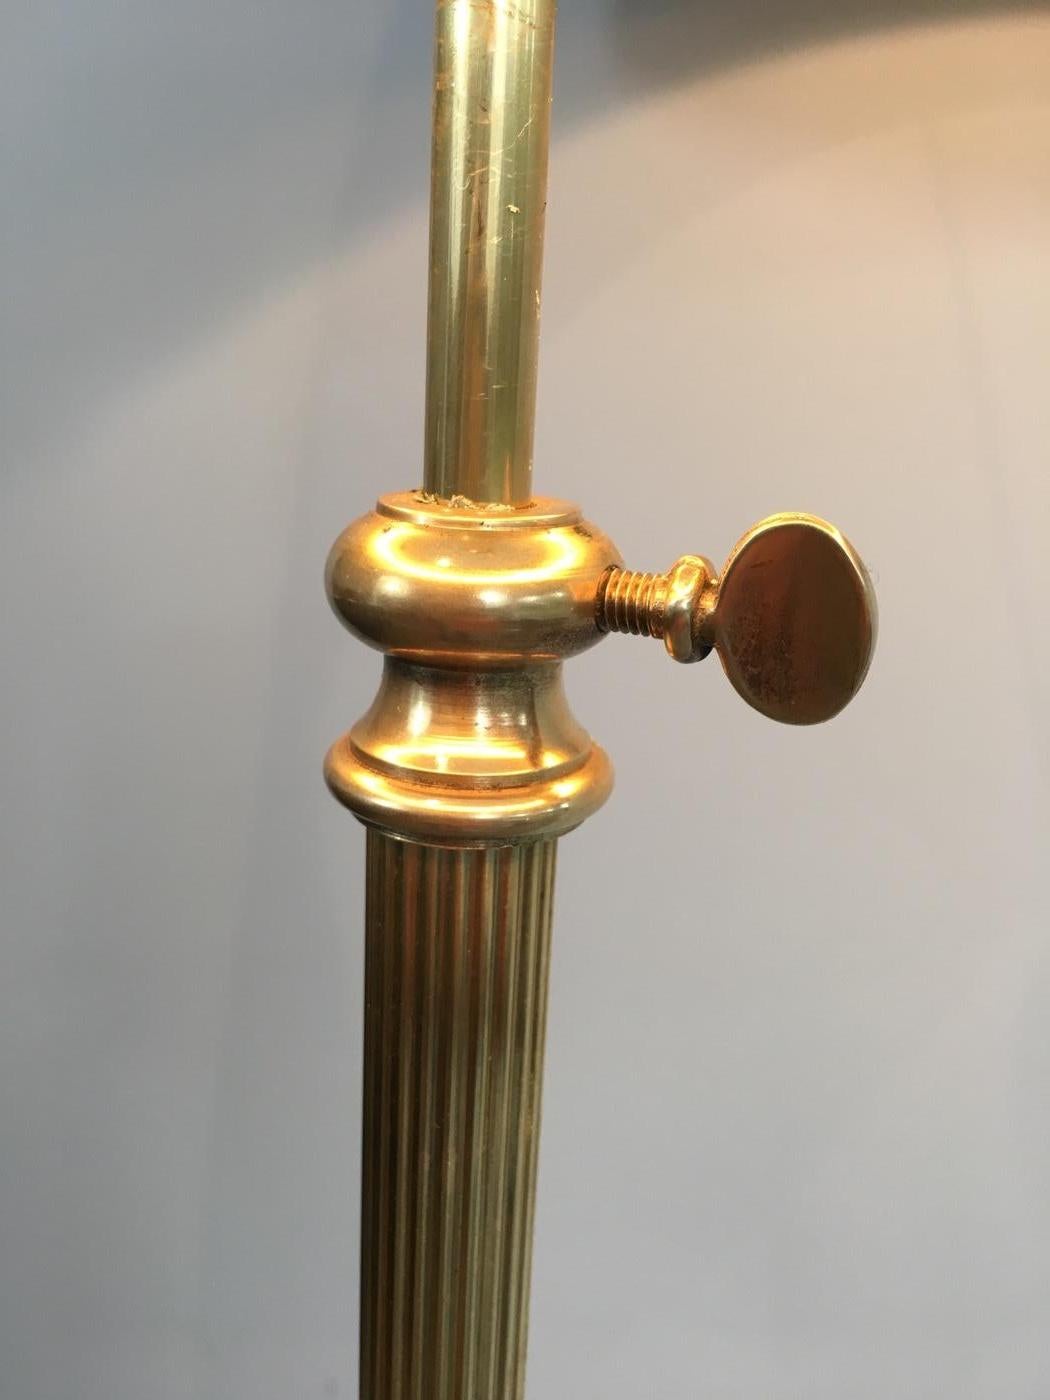 Neoclassical Adjustable Brass Floor Lamp with Black Shade Gold Inside, French (Mitte des 20. Jahrhunderts)